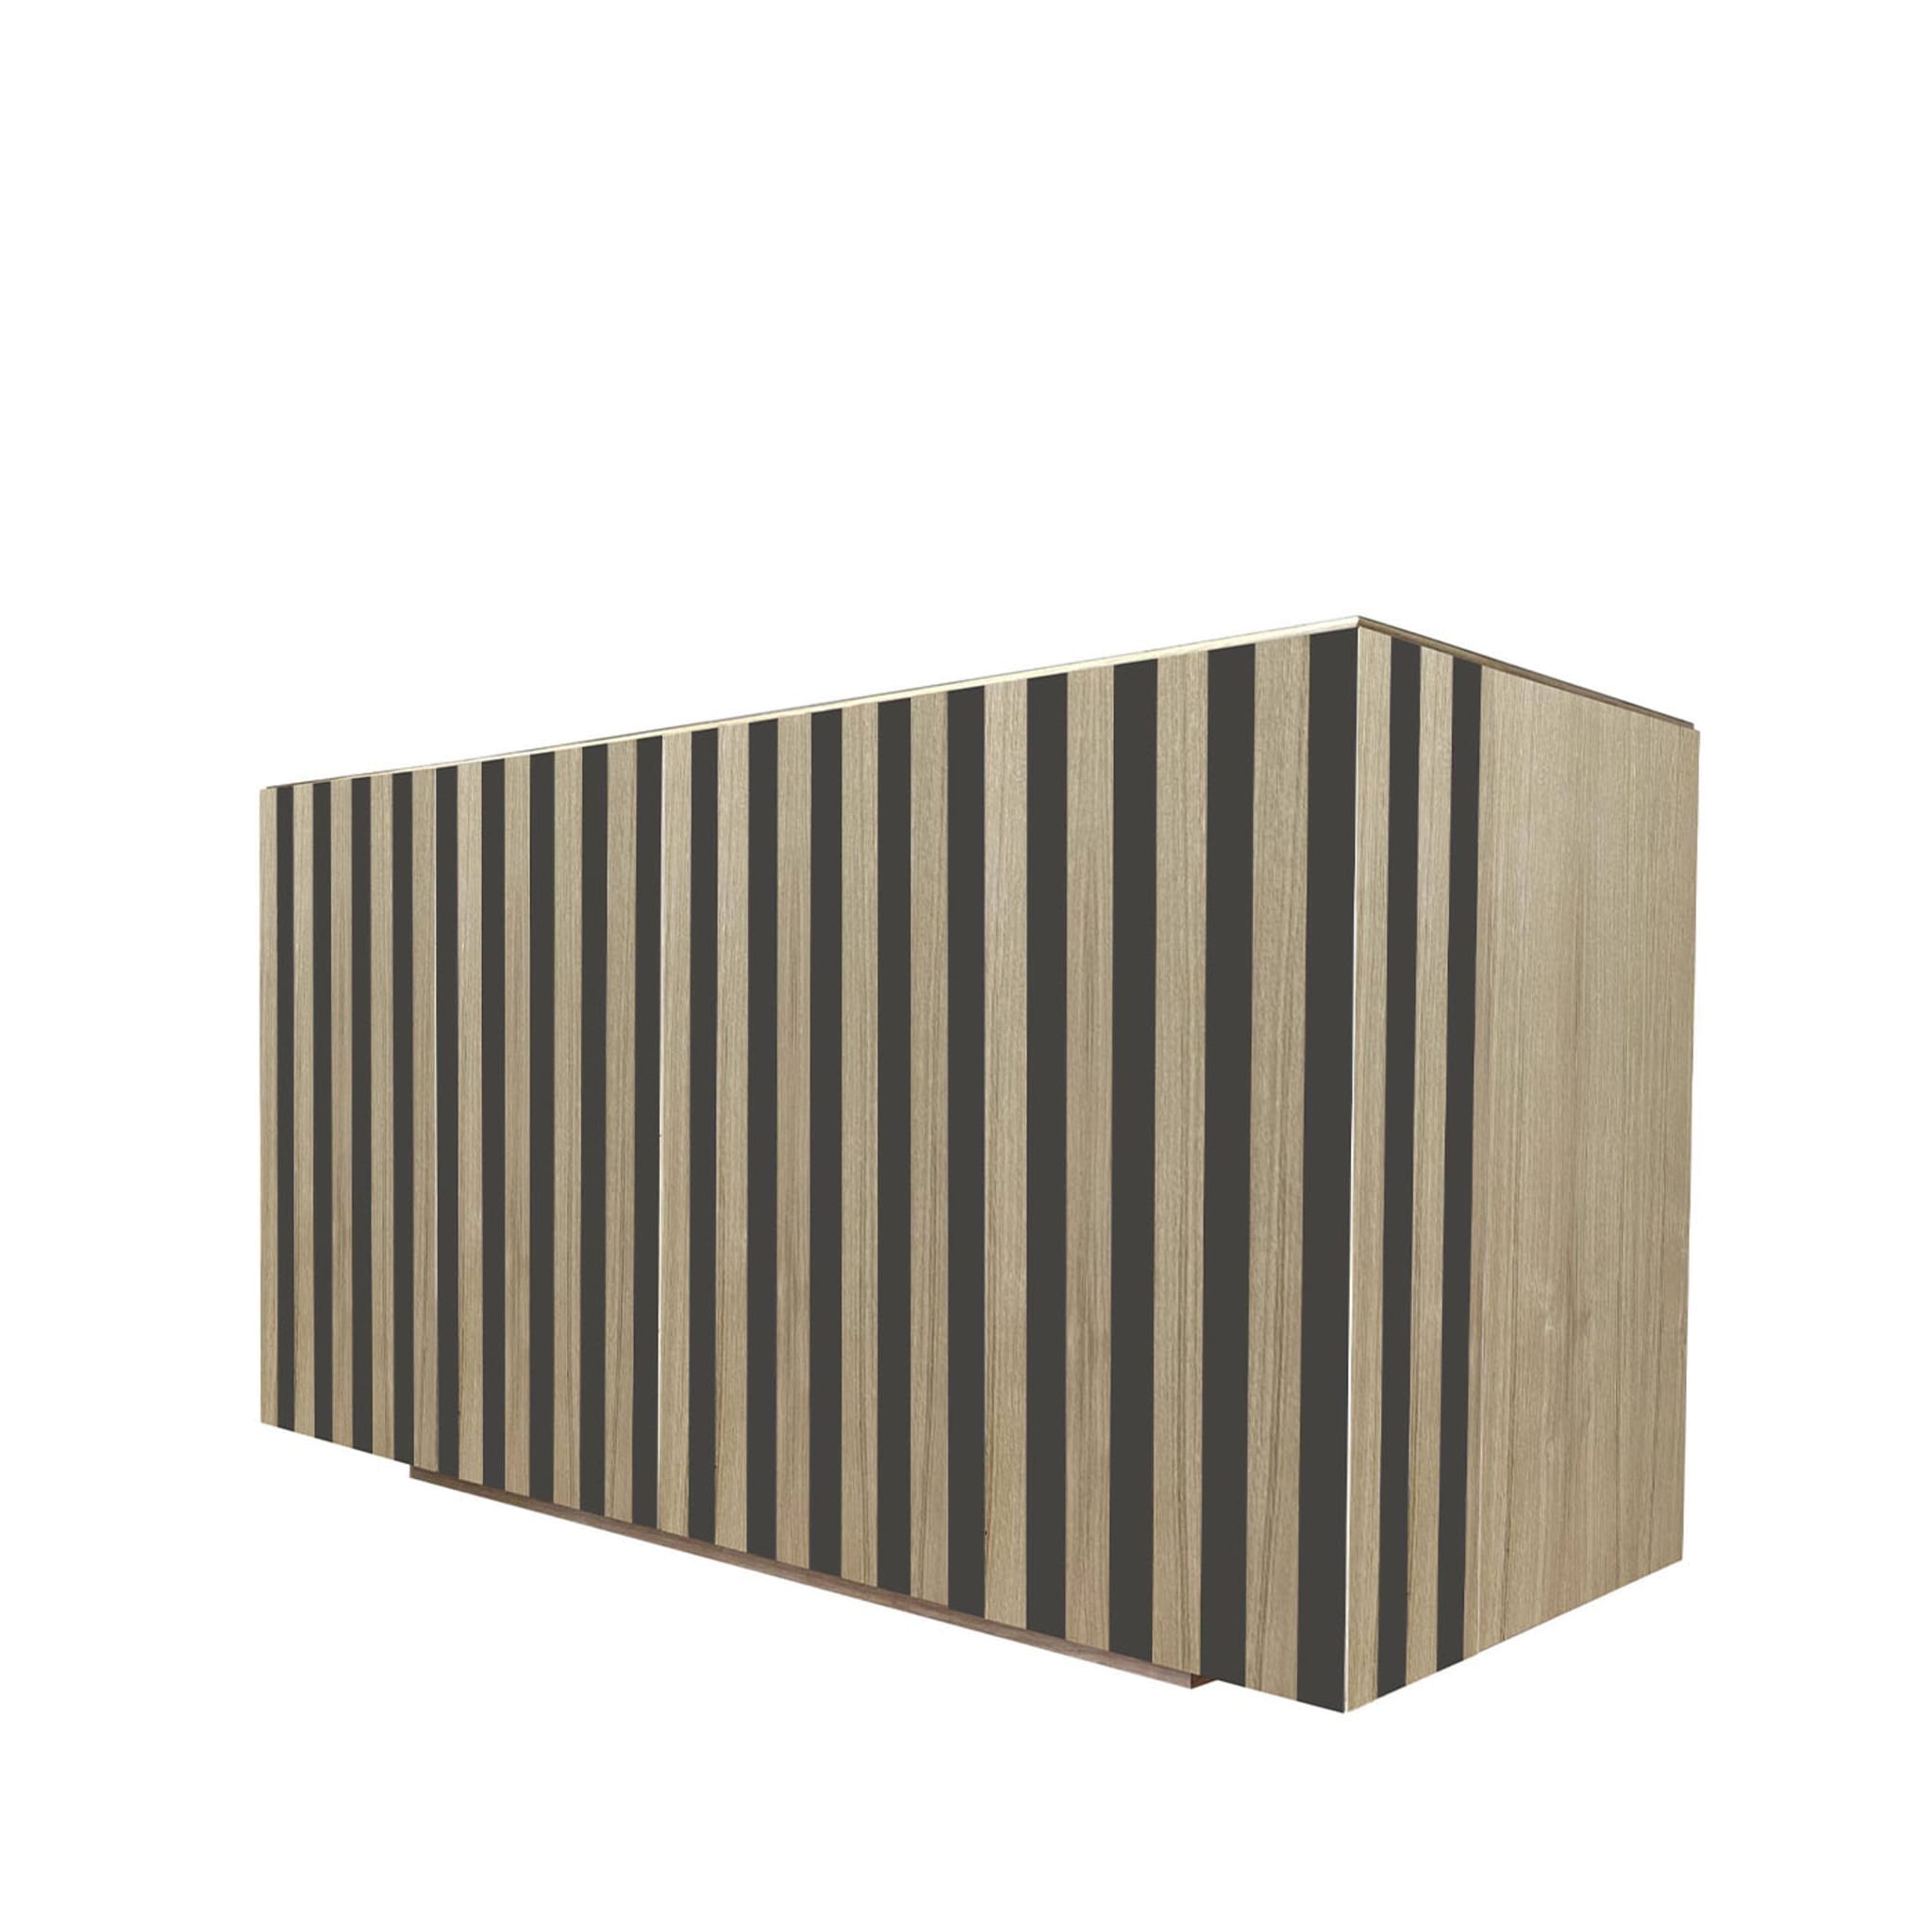 Md1 4-Door Striped Sideboard by Meccani Studio - Alternative view 2